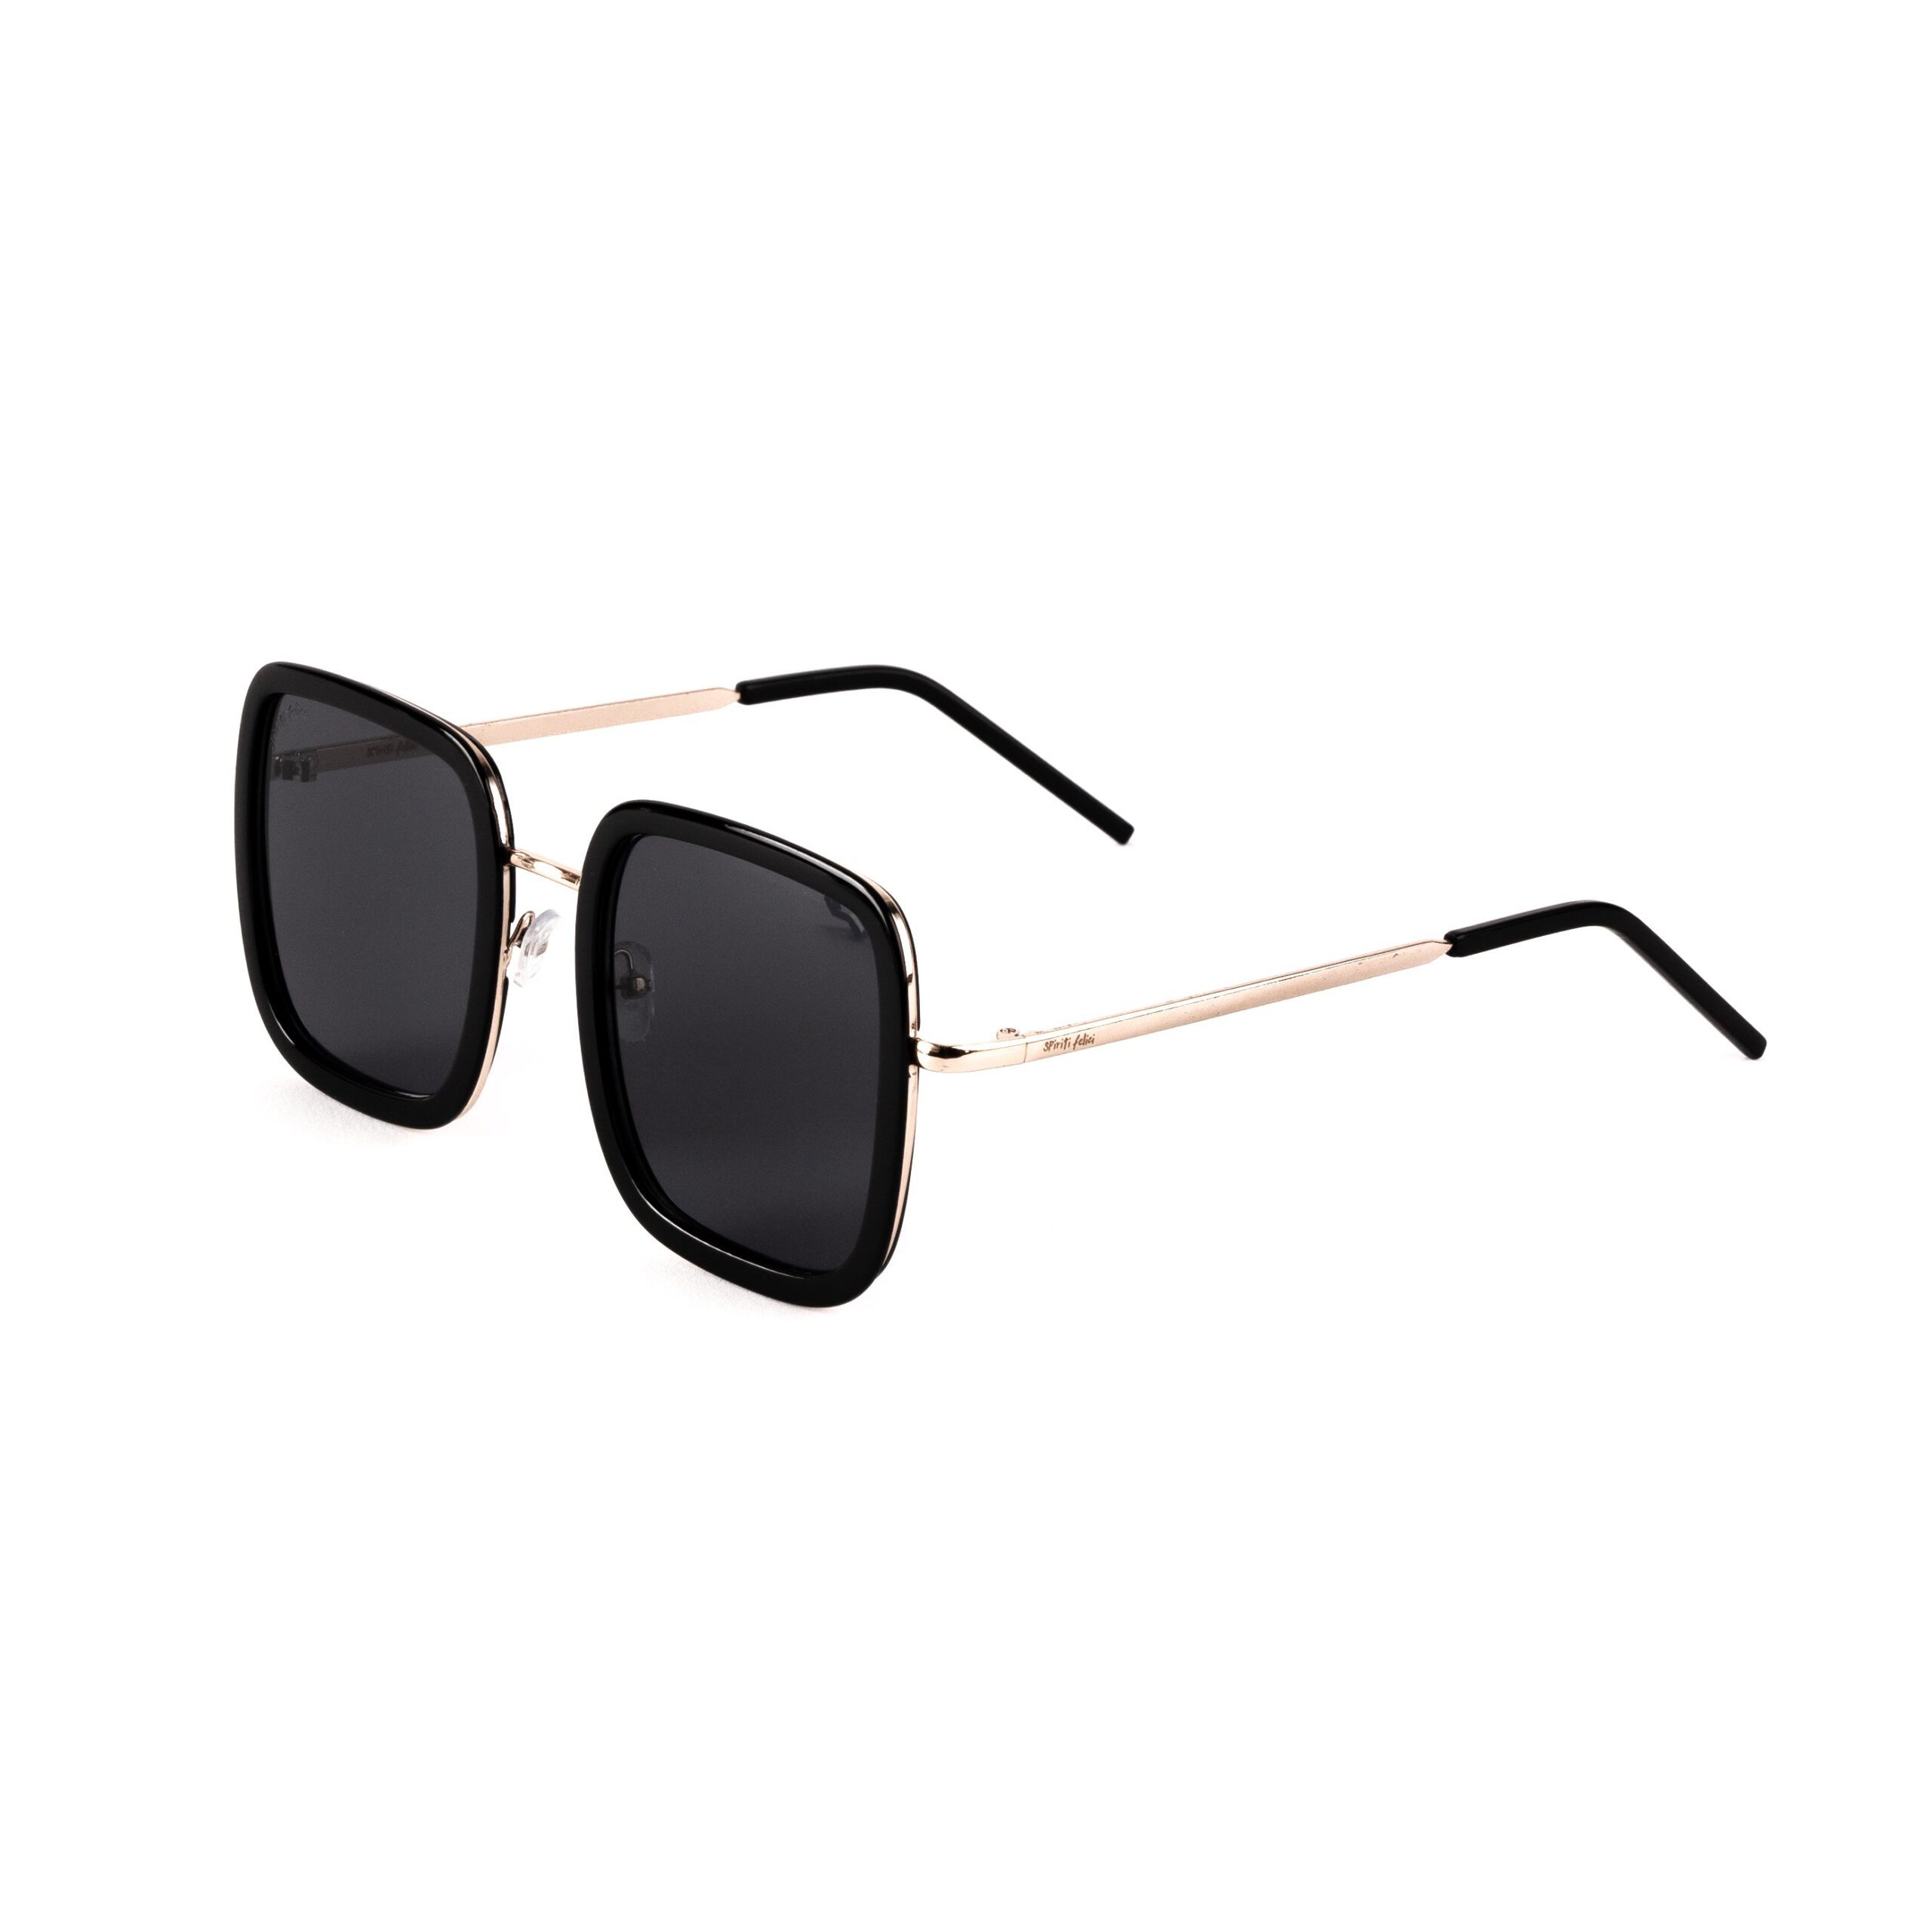 Buy SIZEMORE Sunglasses from Spiriti Felici available online at VEND. Explore more product category collections now